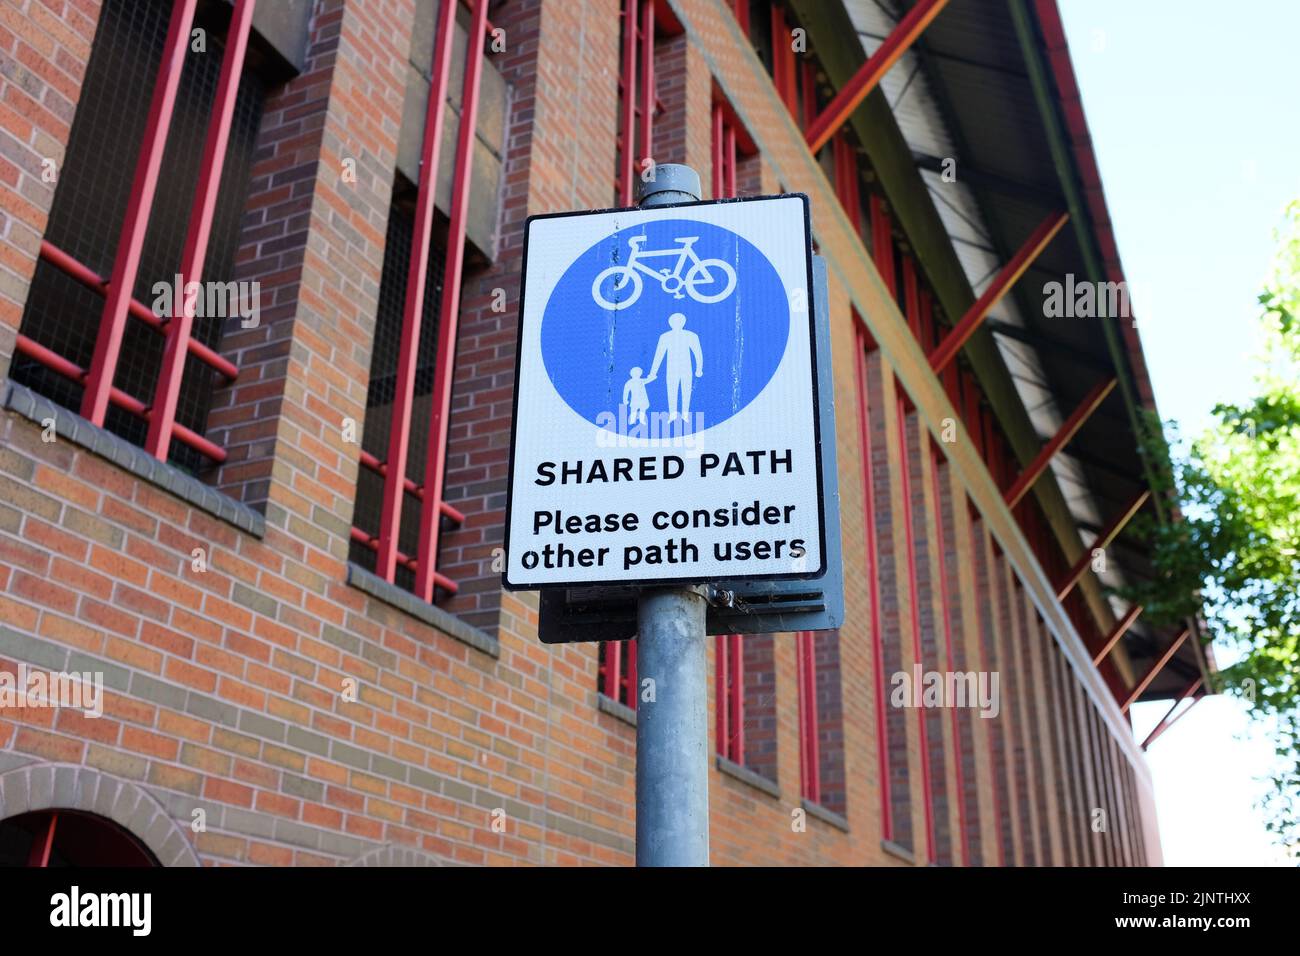 A 'shared path' sign, asking cyclists and pedestrians to use it with consideration. Stock Photo